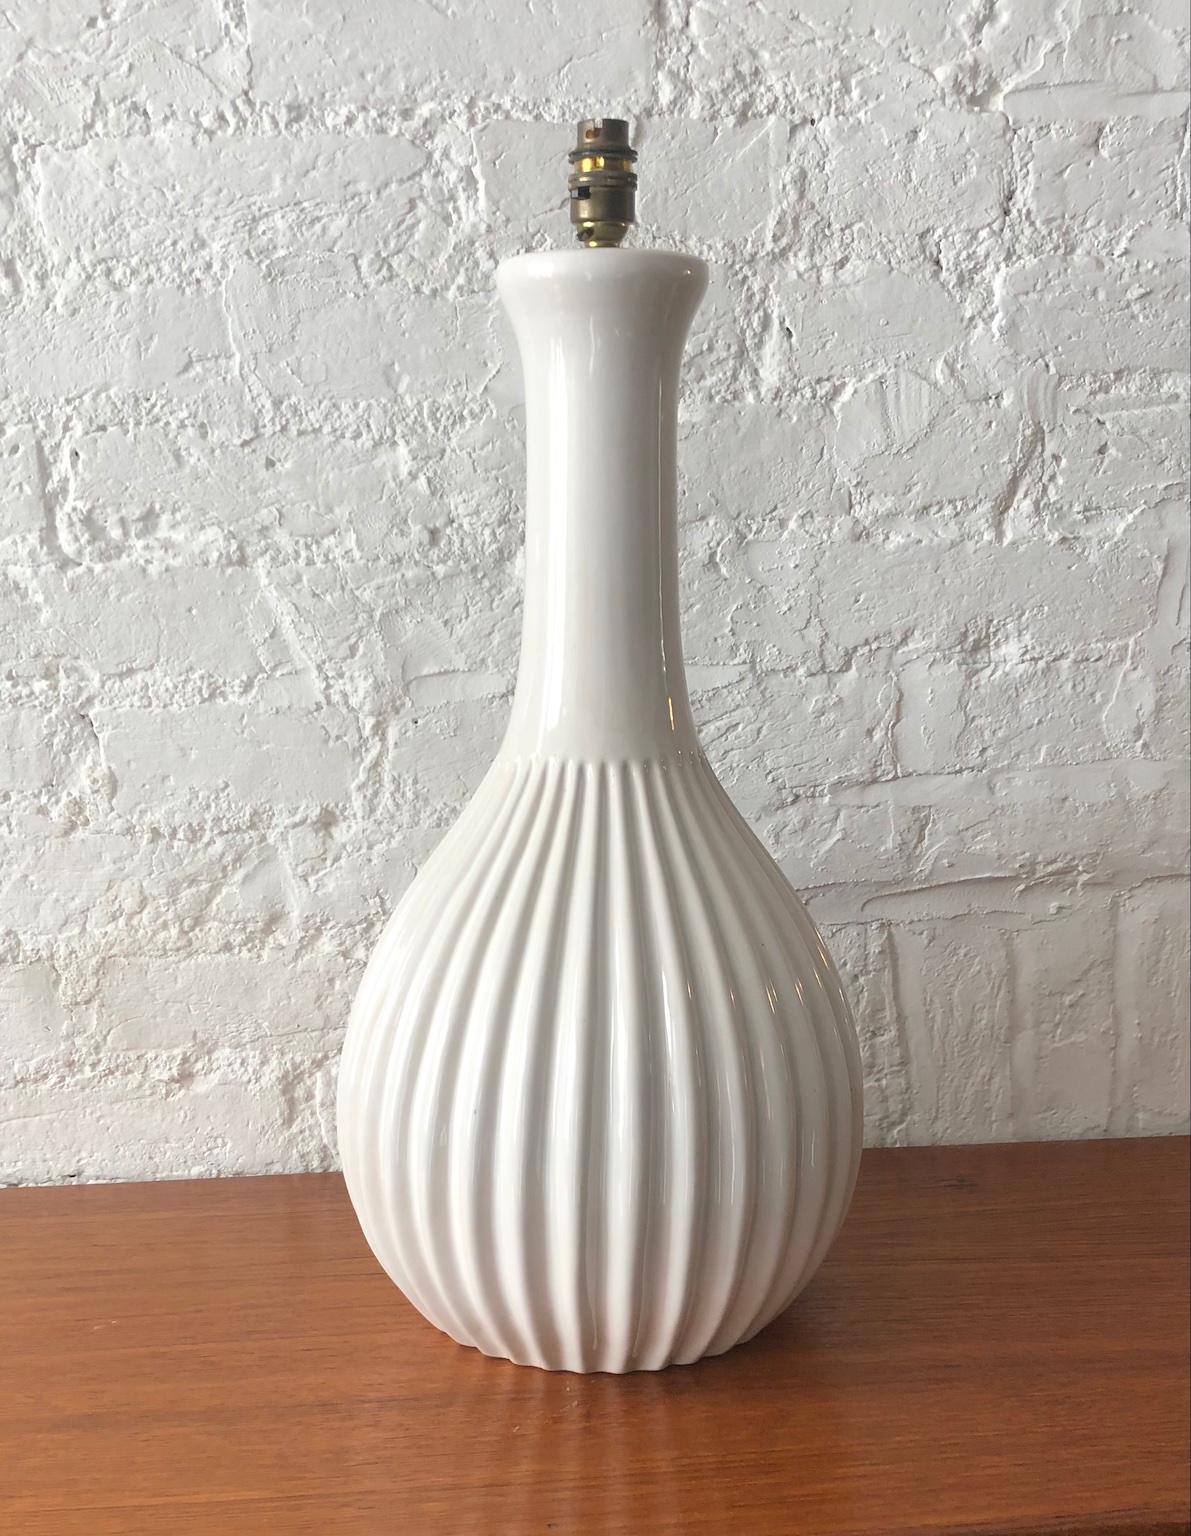 Rare Danish glazed ceramic lamp by Michael Andersen & Sons Danish, 1950s

A stunning large white glazed ceramic Lamp by Michael Andersen & Sons. 
The lamp is bottle form in shape with, a ribbed surface and a tall smooth neck.

Designed by